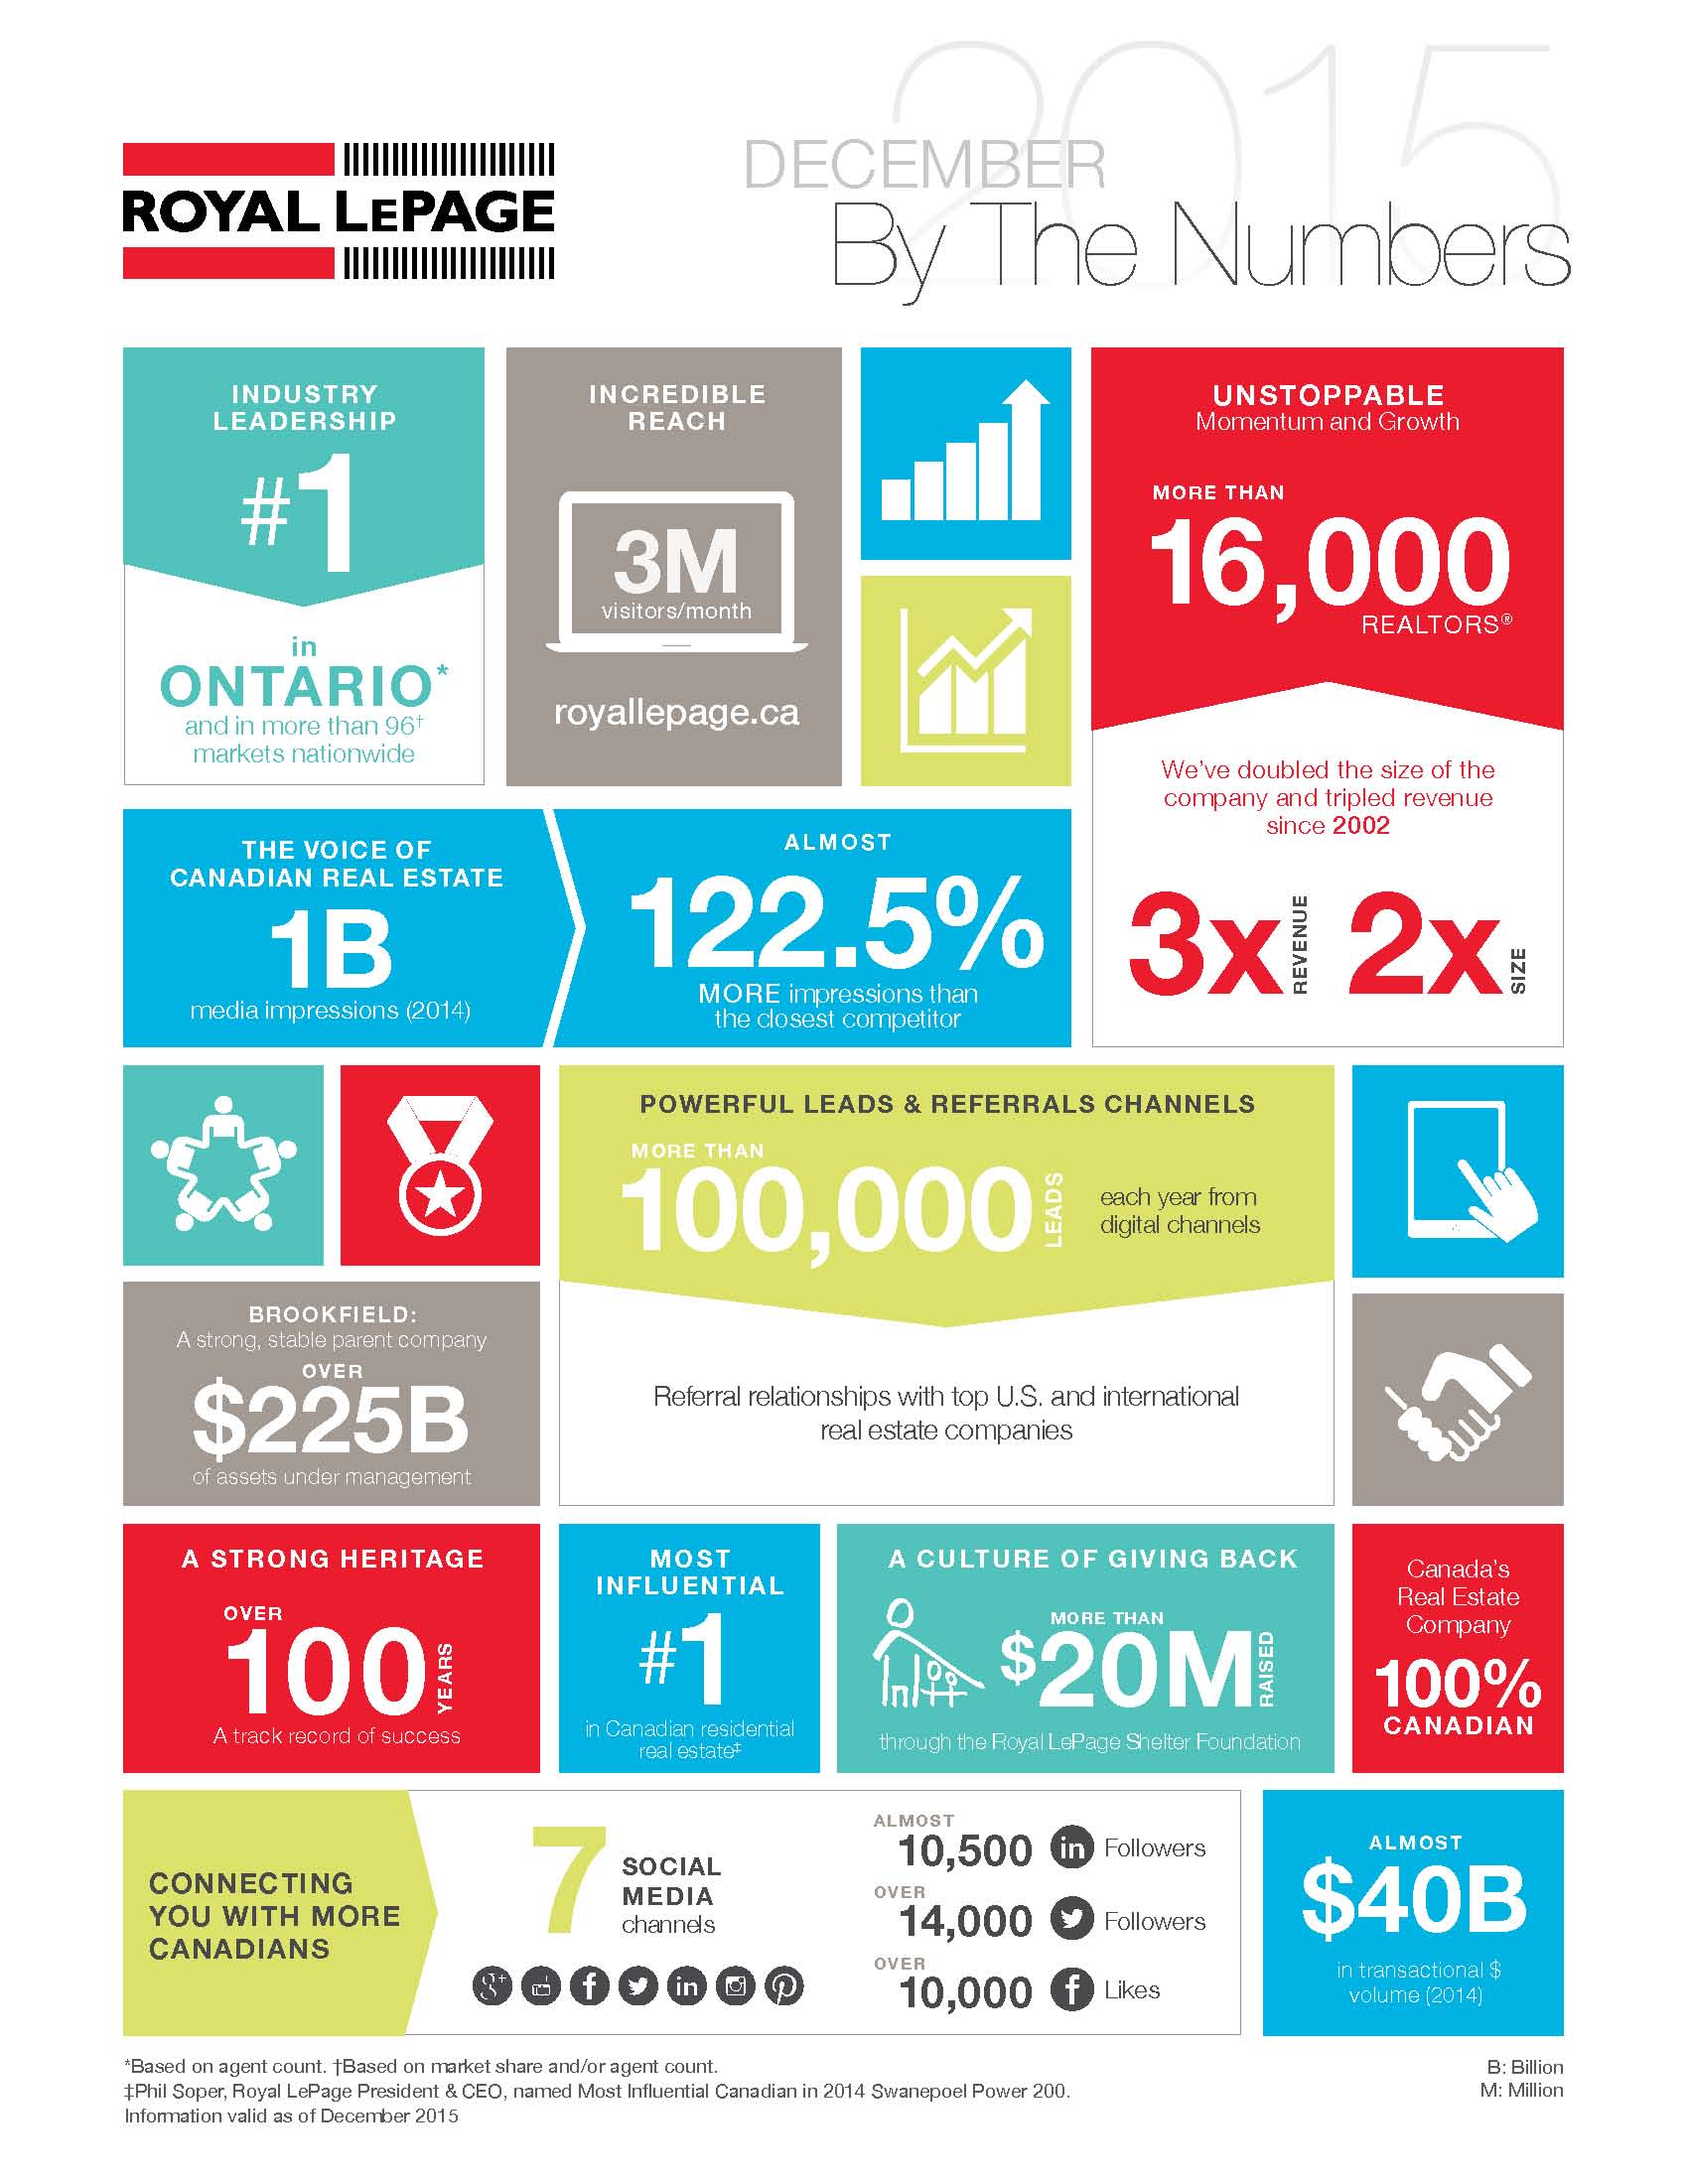 Royal LePage by the Numbers